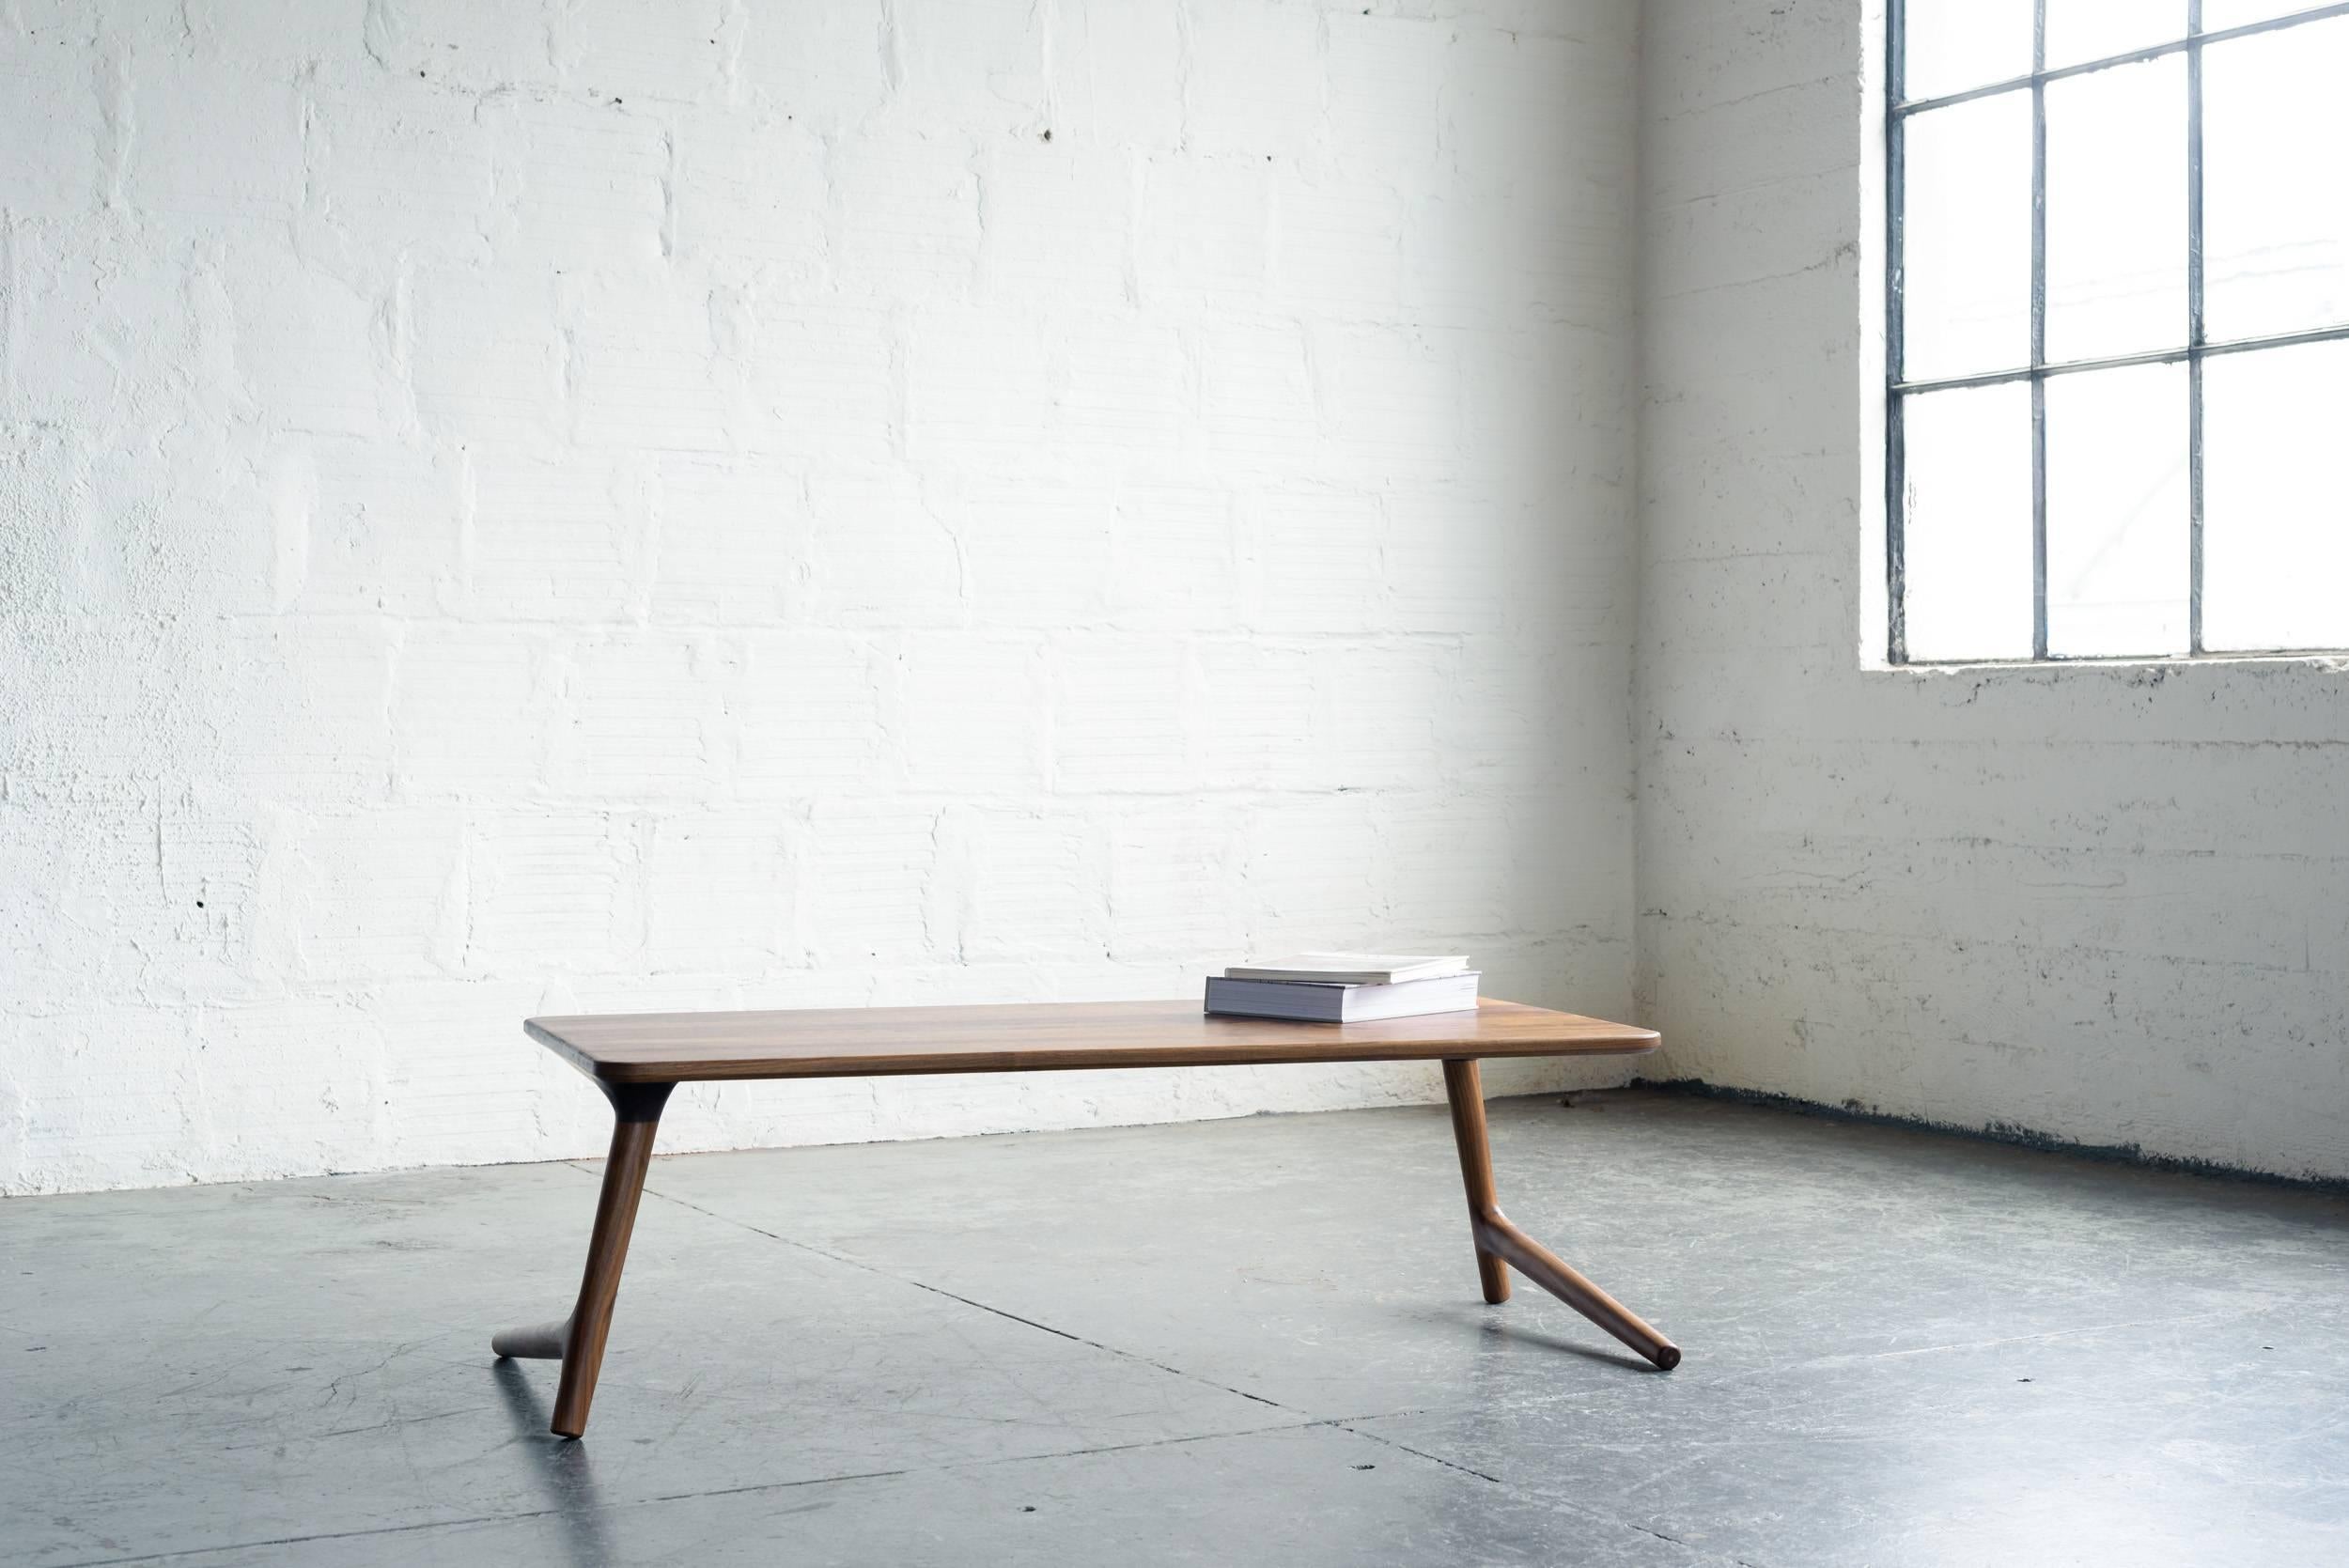 Contemporary Minimal Coffee Table made from Walnut Wood, by Fernweh Woodworking